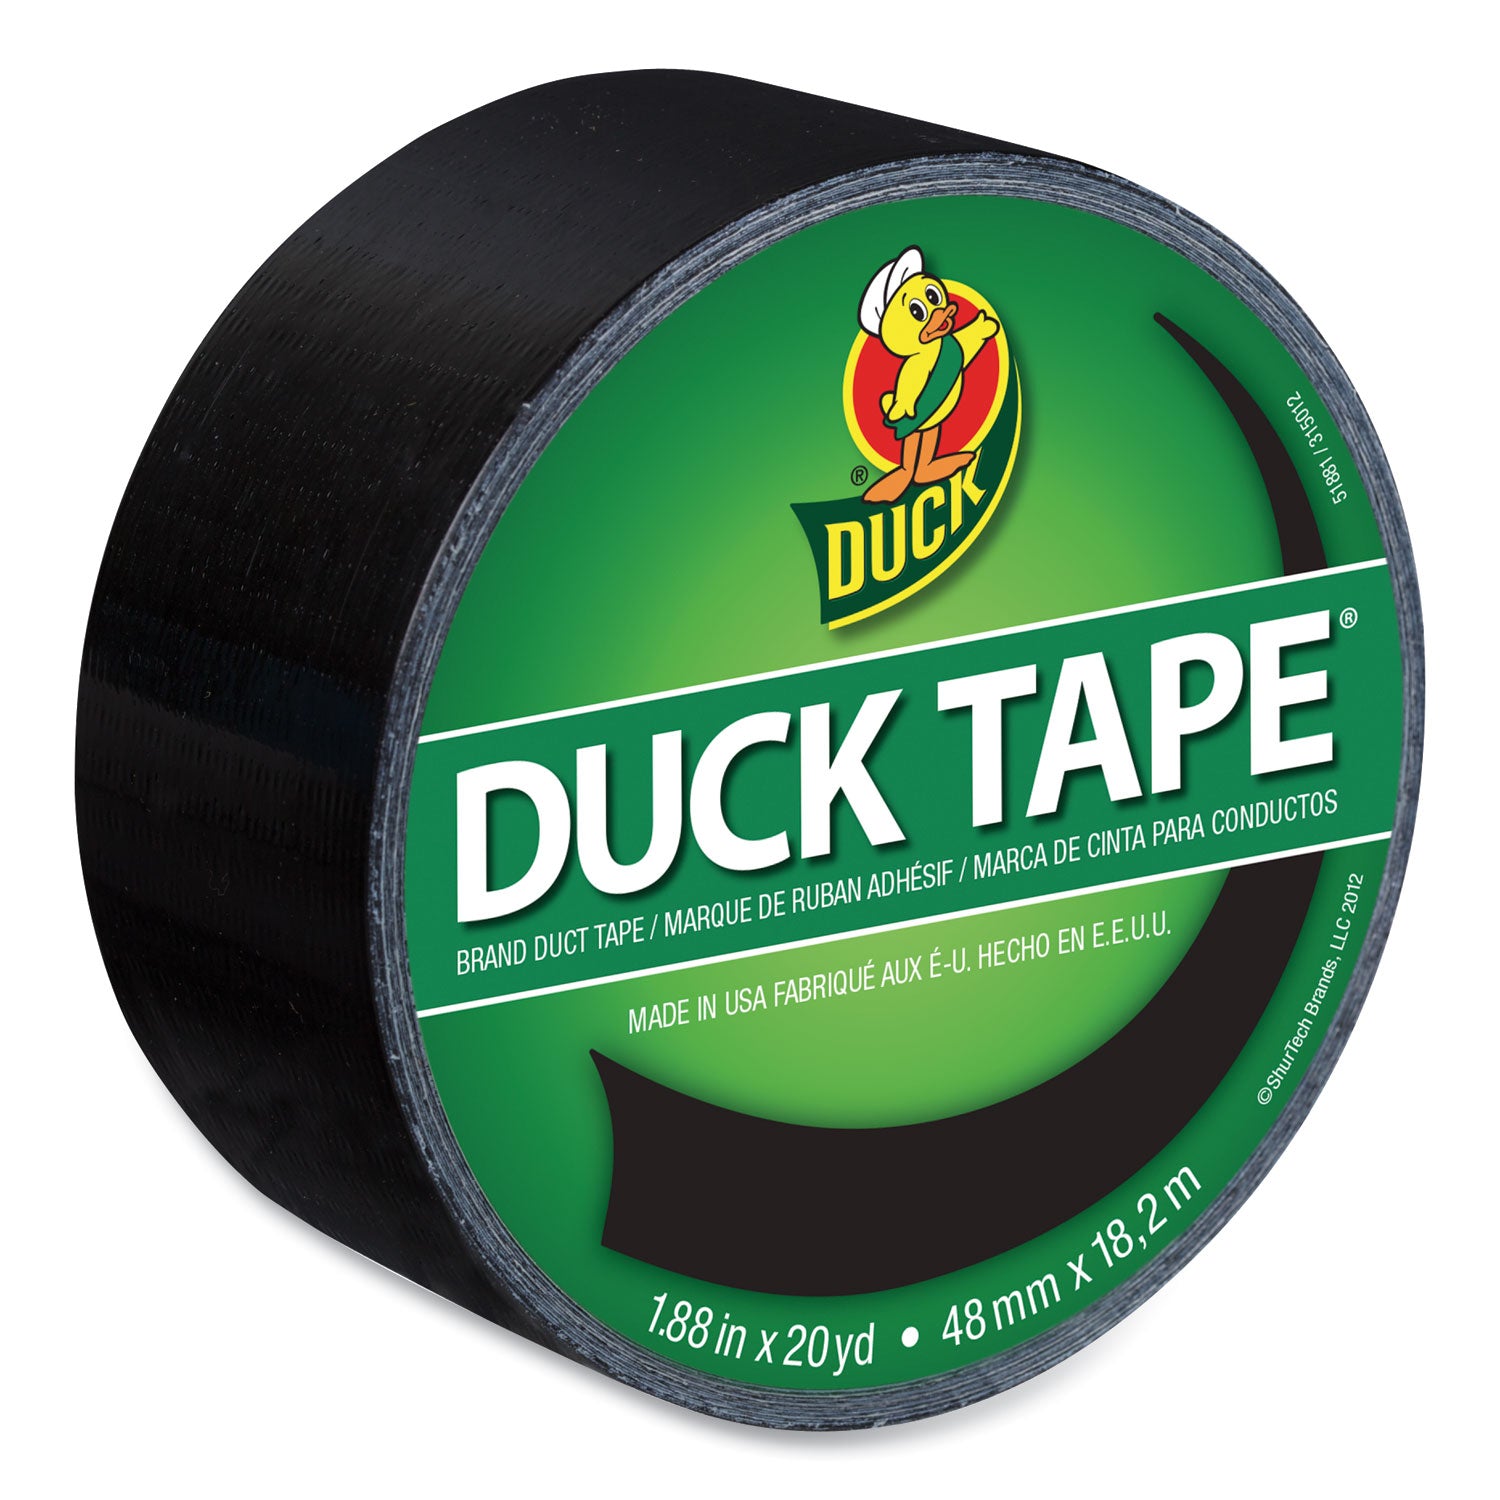 Colored Duct Tape, 3" Core, 1.88" x 20 yds, Black - 